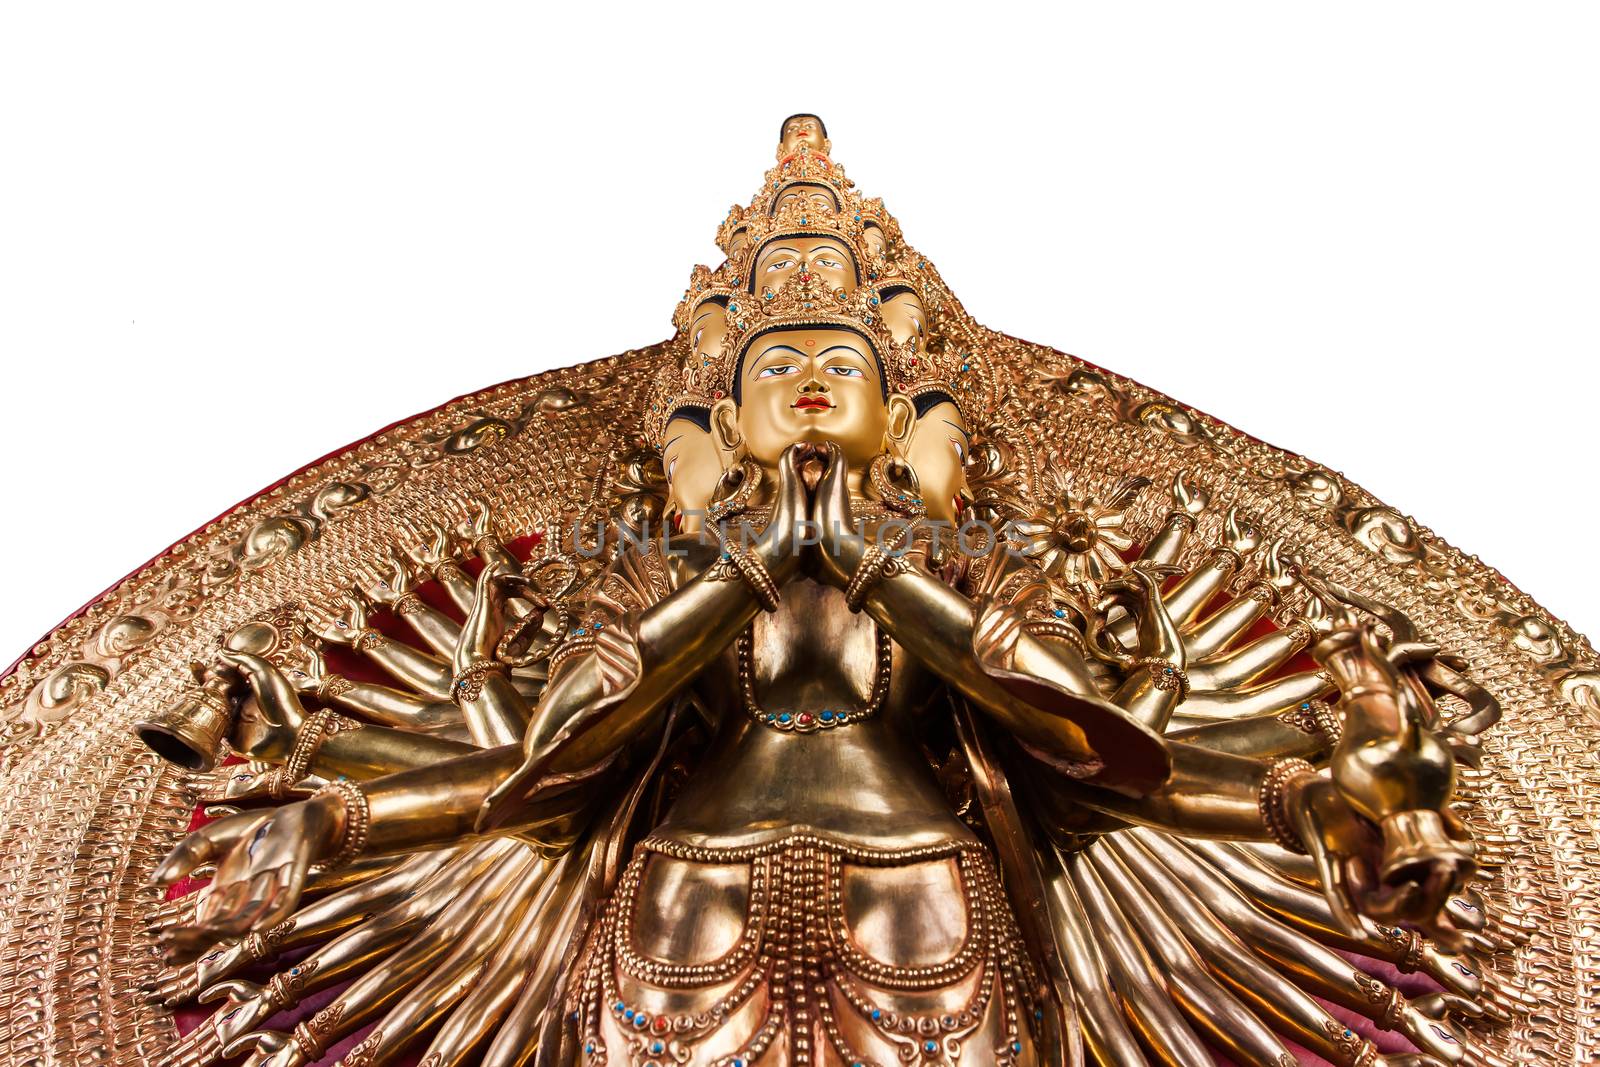 With thousand arms a bodkhisattva of an Avalokiteshvara - The statue made of bronze isolated on a white background.